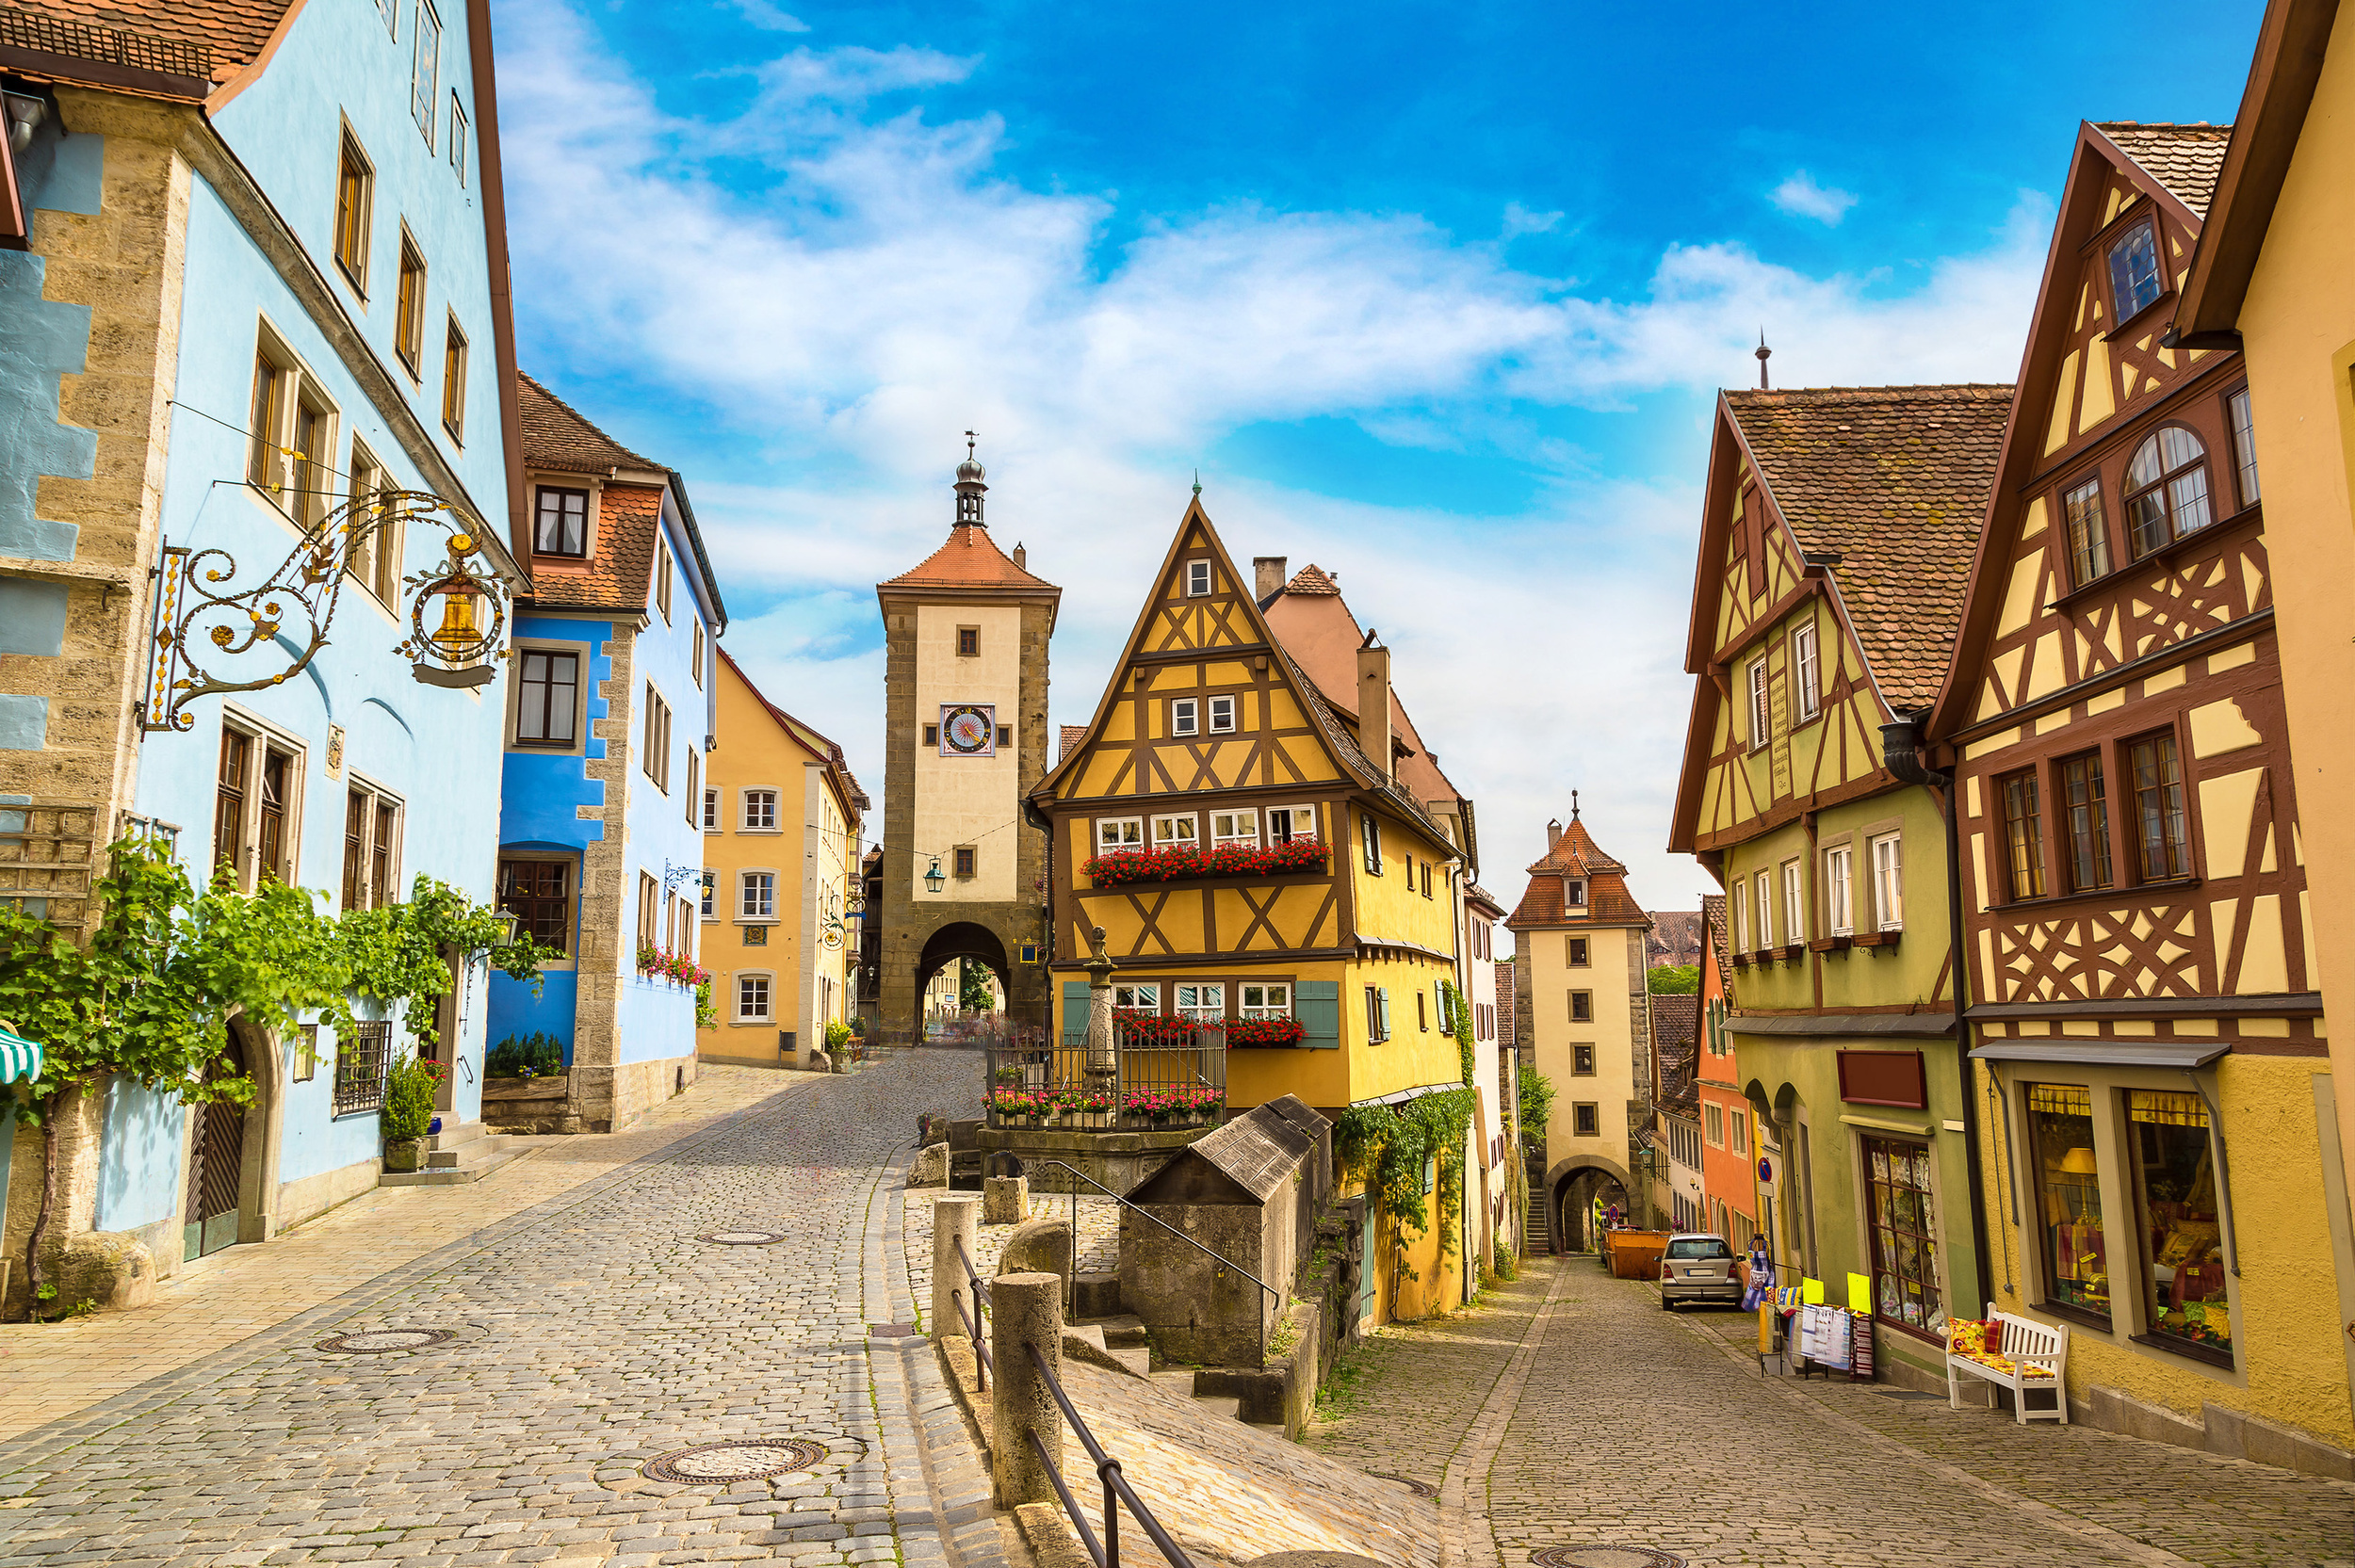 <p>This route weaves through two southern provinces, Bavaria and Baden-Württemberg,<span> and follows an old Roman road. You’ll enjoy stunning views in the Bavarian Alps, storybook castles like Neuschwanstein, and medieval towns like Rothenburg de Tauber.</span></p><p>You may also like: <a href='https://www.yardbarker.com/lifestyle/articles/the_15_best_beach_towns_in_italy_031624/s1__36883517'>The 15 best beach towns in Italy</a></p>